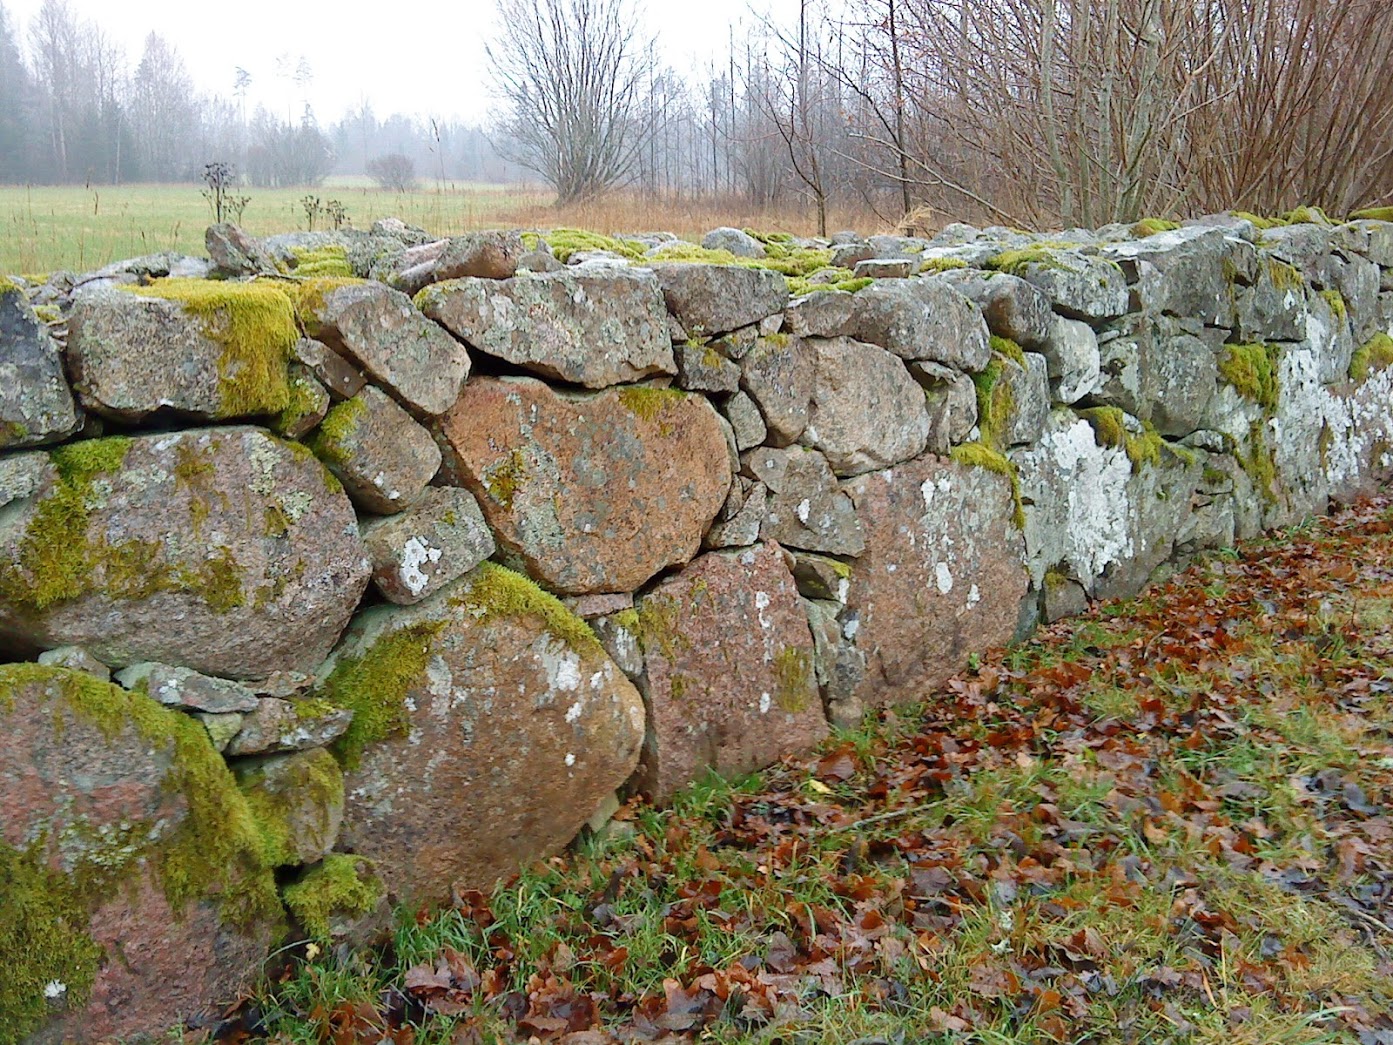 Typical Småland-ish (name province arround Lammhult) stone wall. Need to go deep to manage the ground frost in the winter.